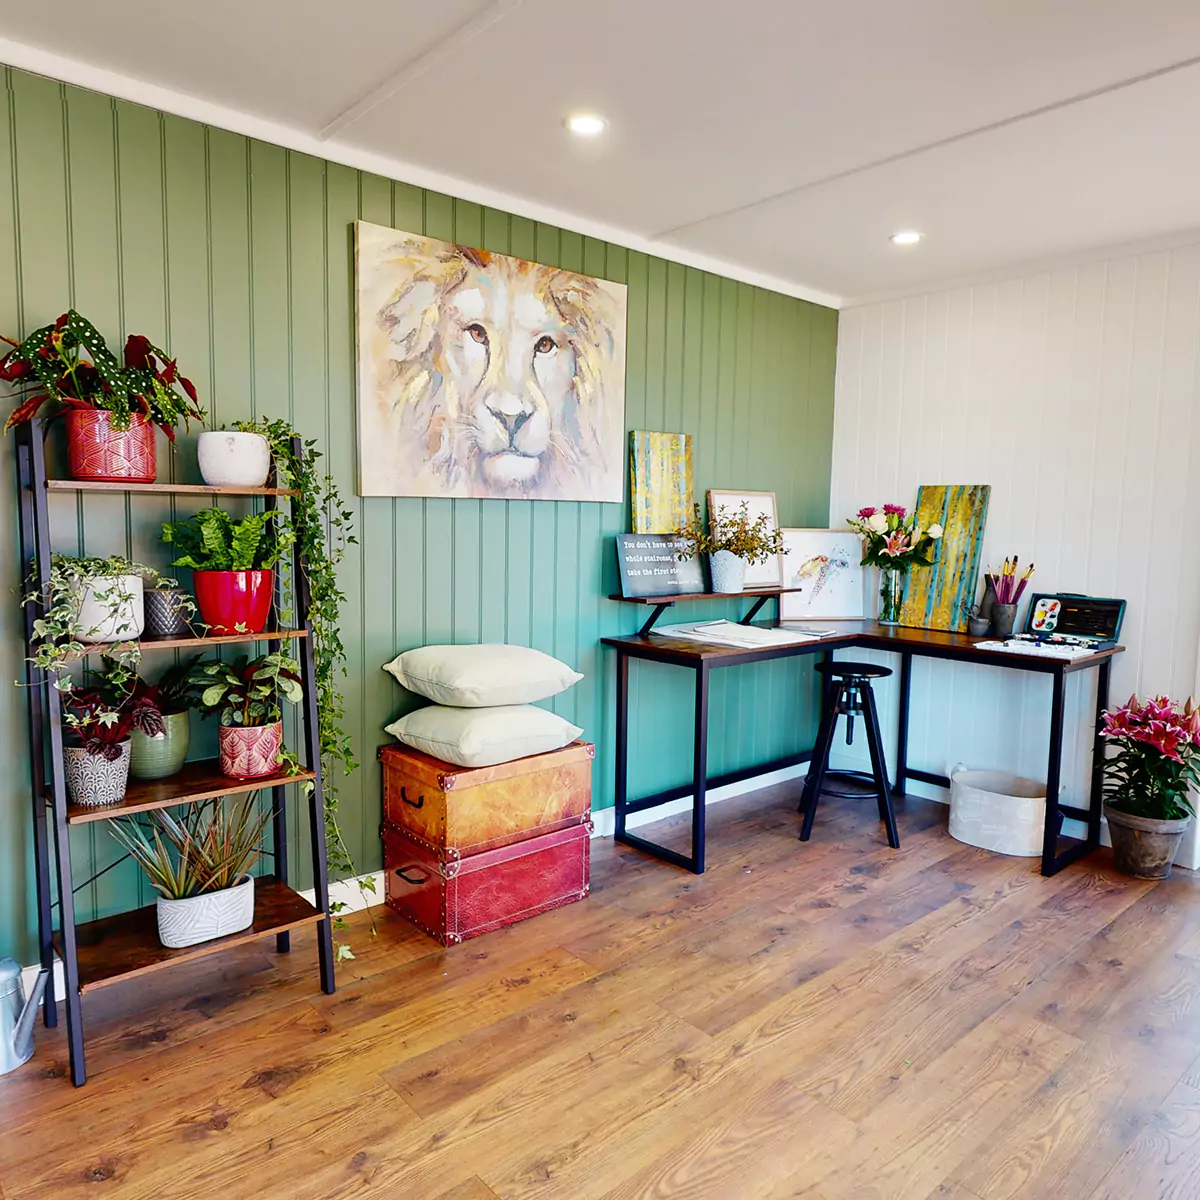 Interior of a garden artists studio looking across desk with easel and artists accessories